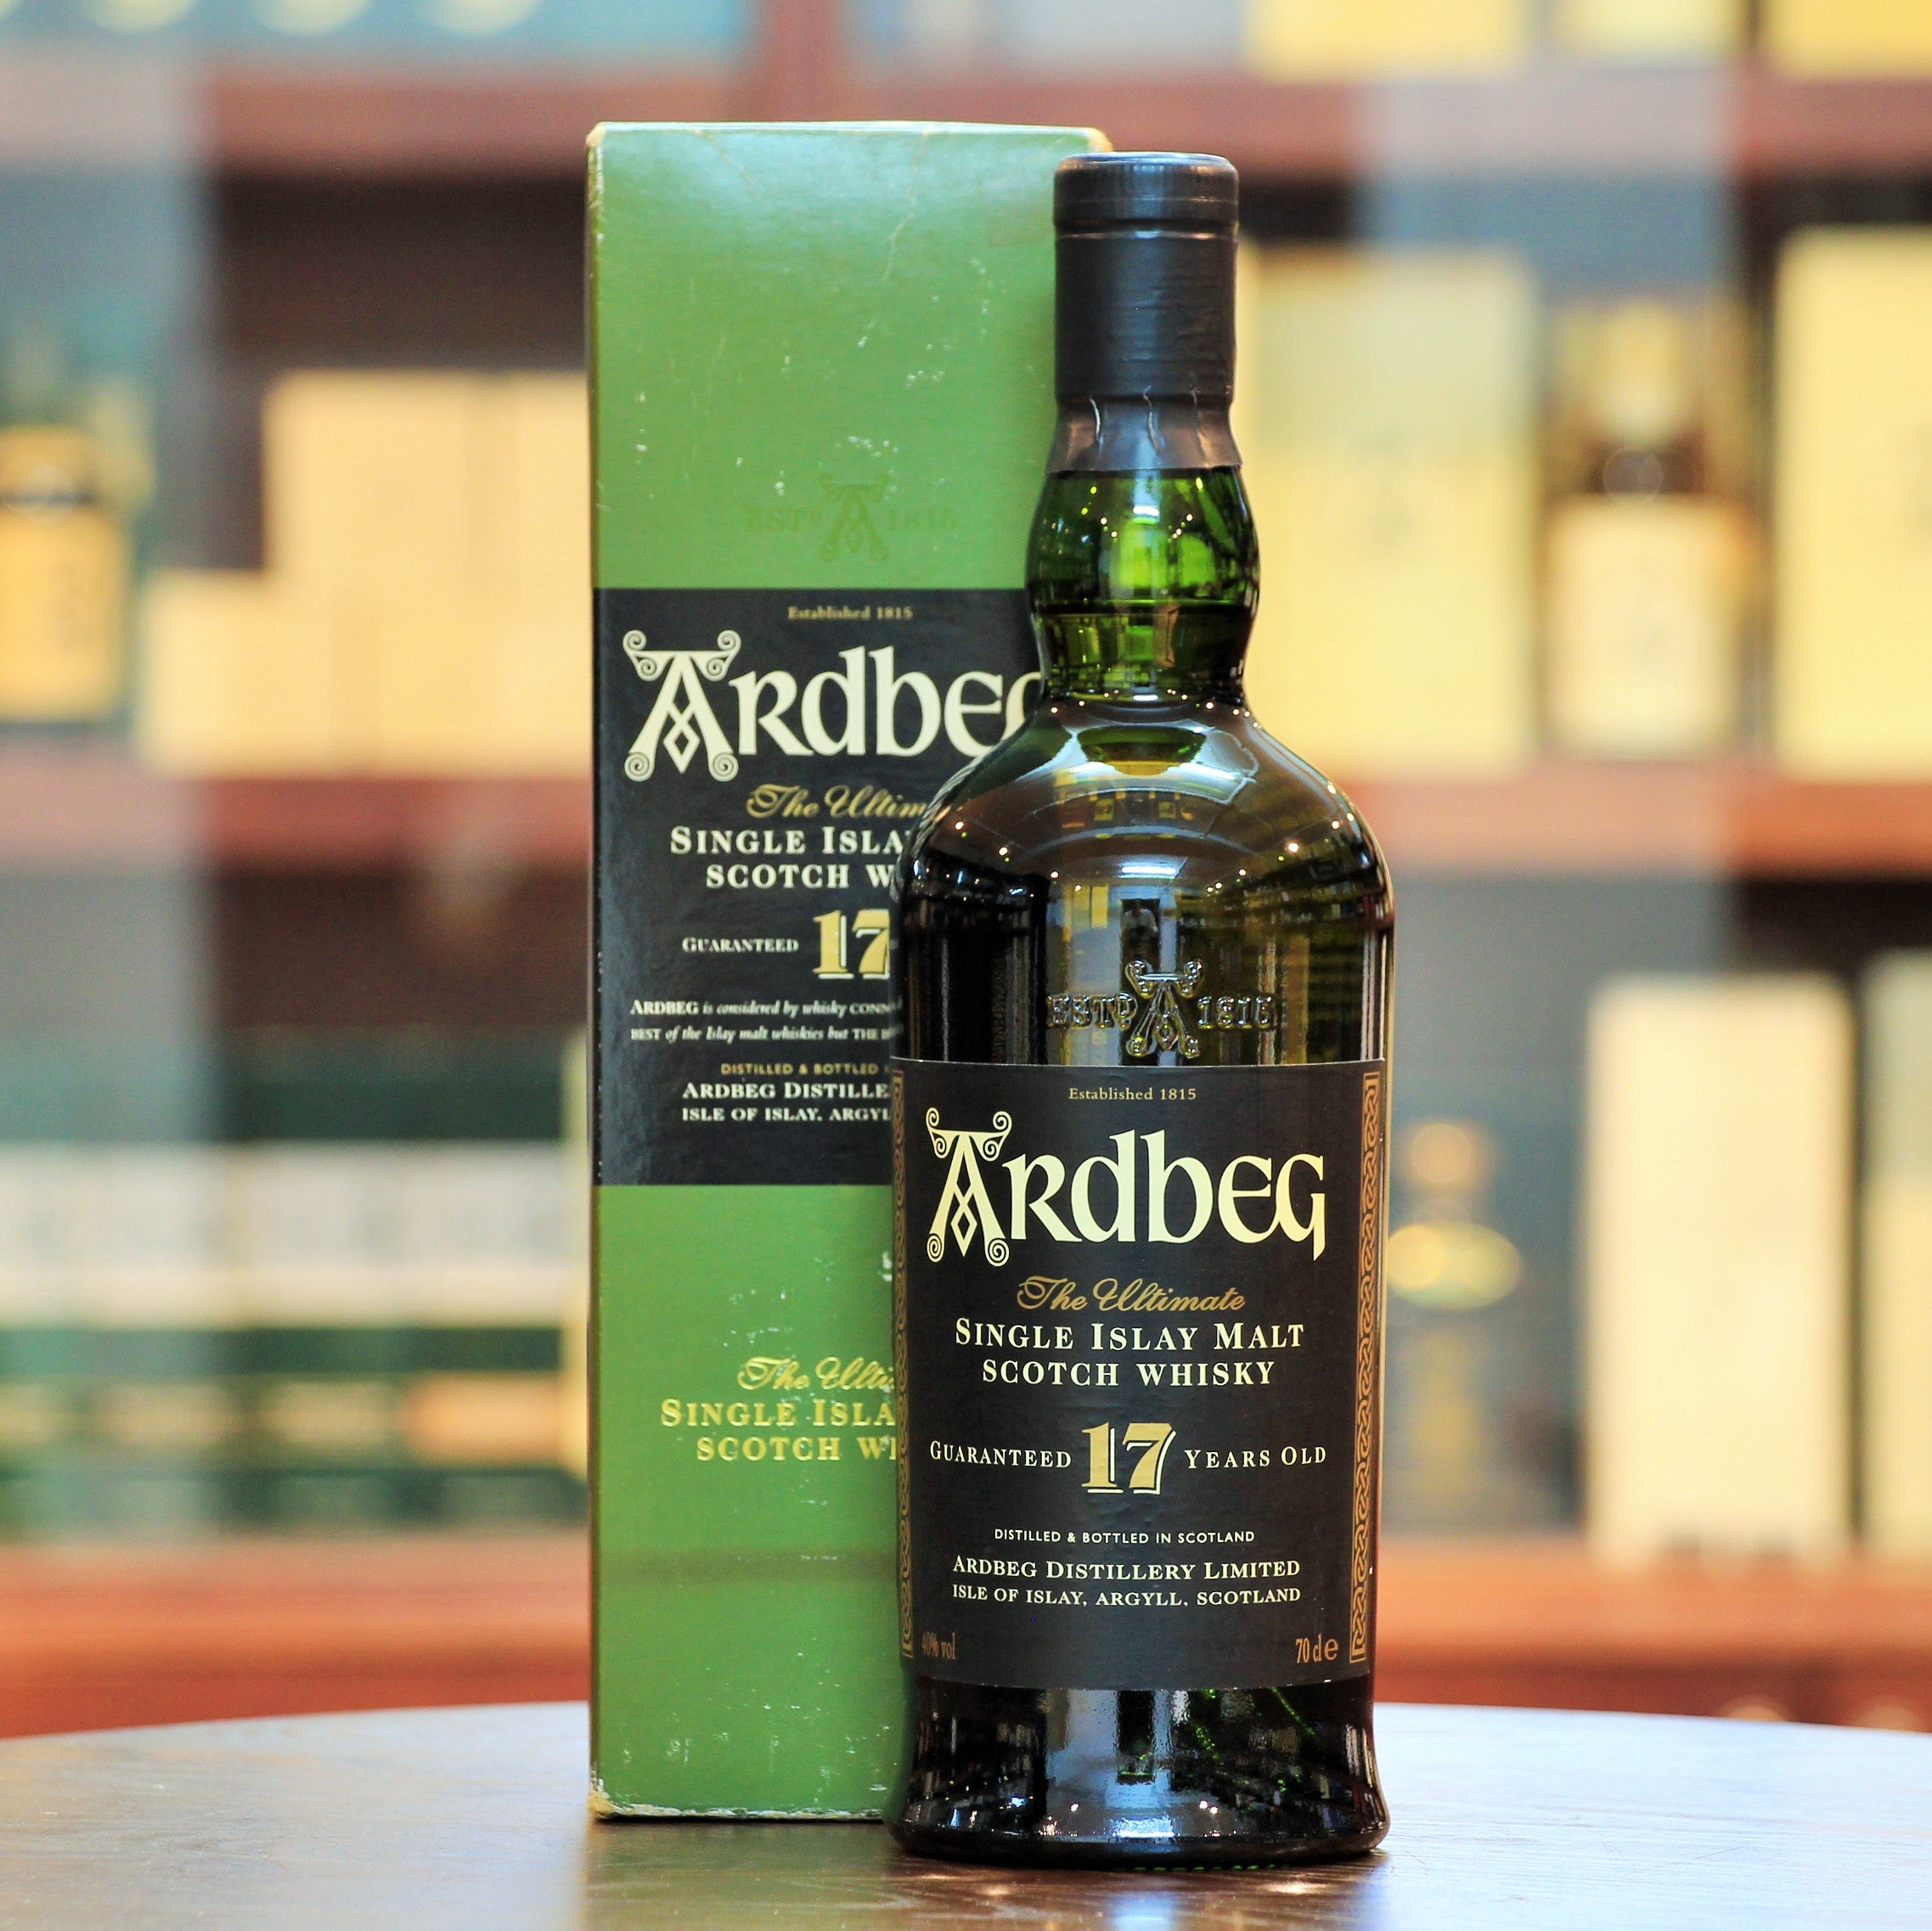 ardbeg 17 single malt, A discontinued bottling and much difficult to find, this is one of the few Ardbegs with an age statement. Please note the slight damage on the box. Sold in "as is" condition.